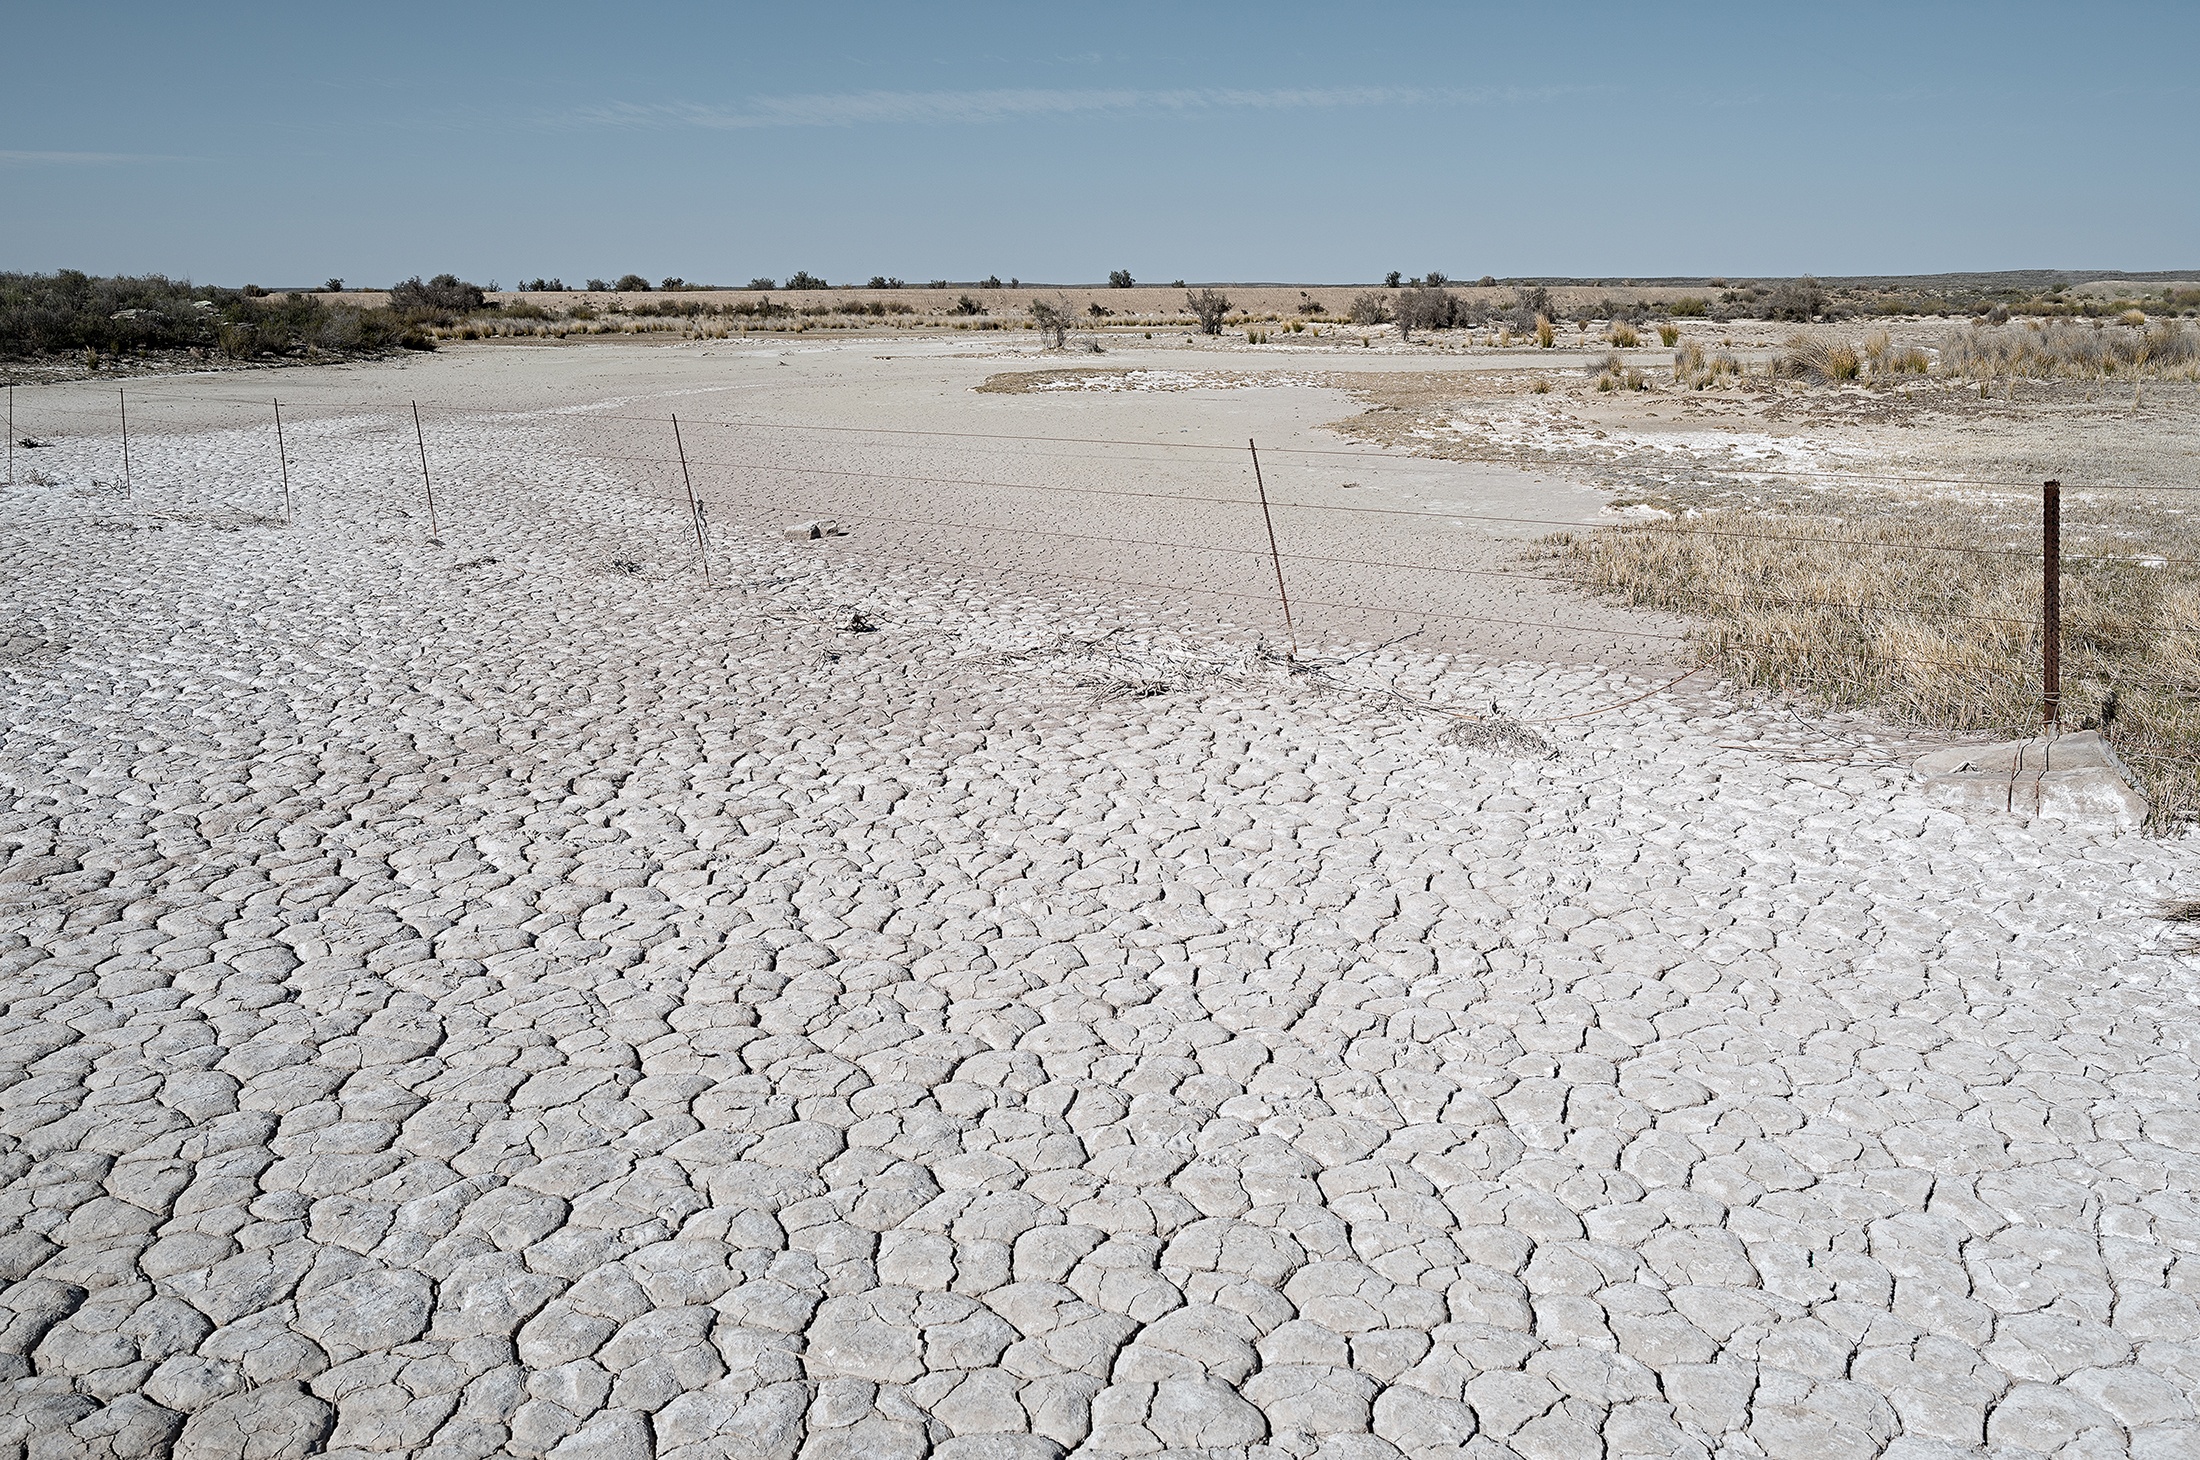 Photograph by David Lurie, from his book ‘Karoo - Land of Thirst,’ that depicts a wire property boundary that cuts through dry land.
